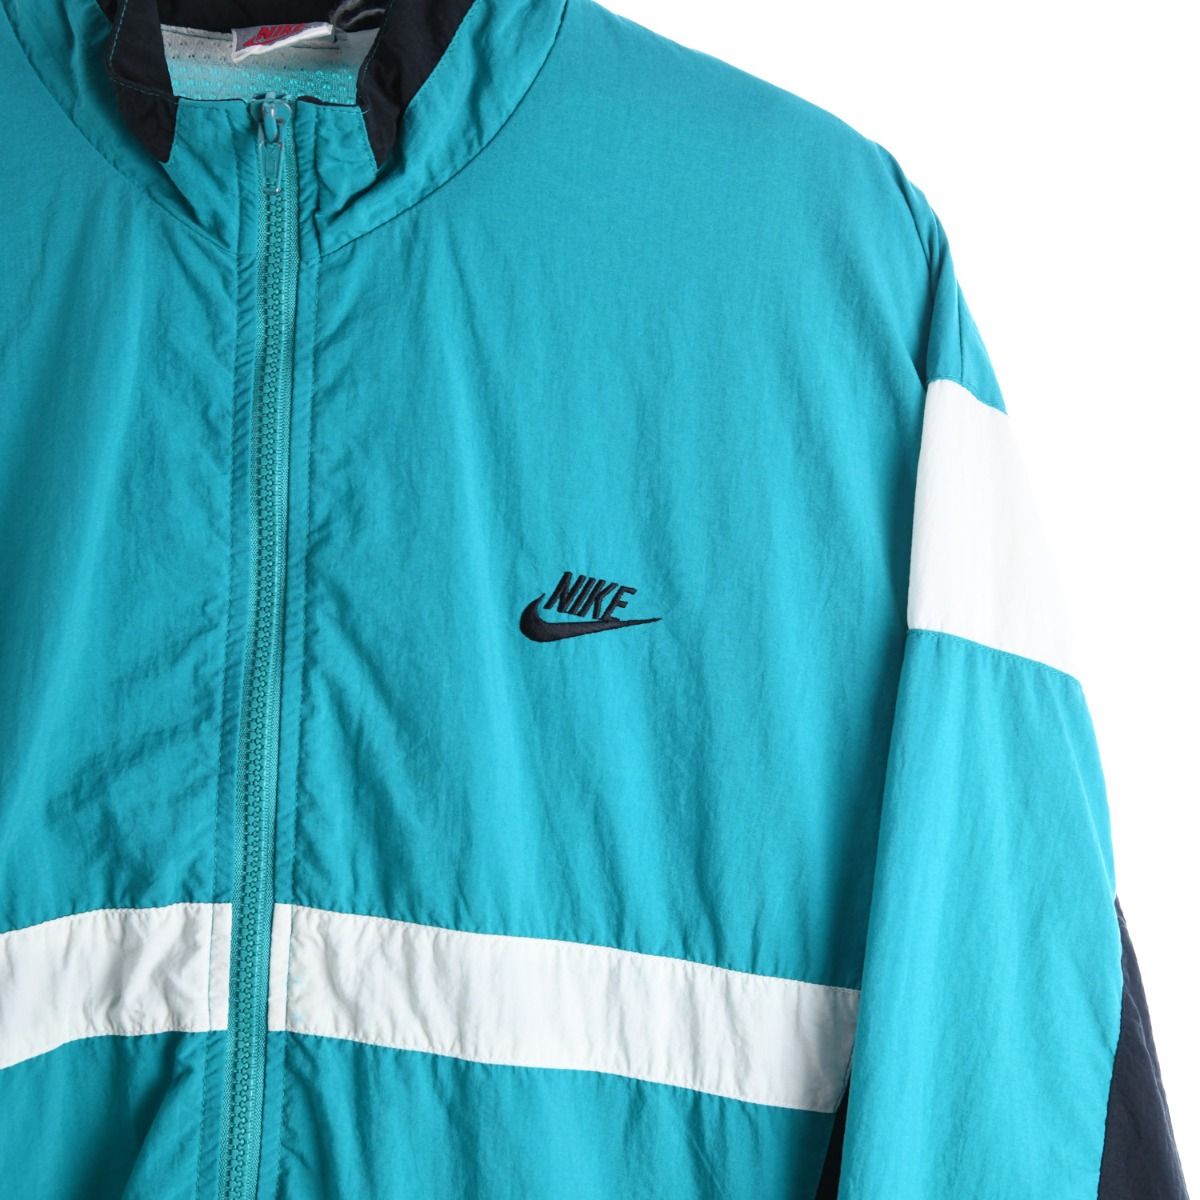 Nike Early 1990s Teal Shell Jacket